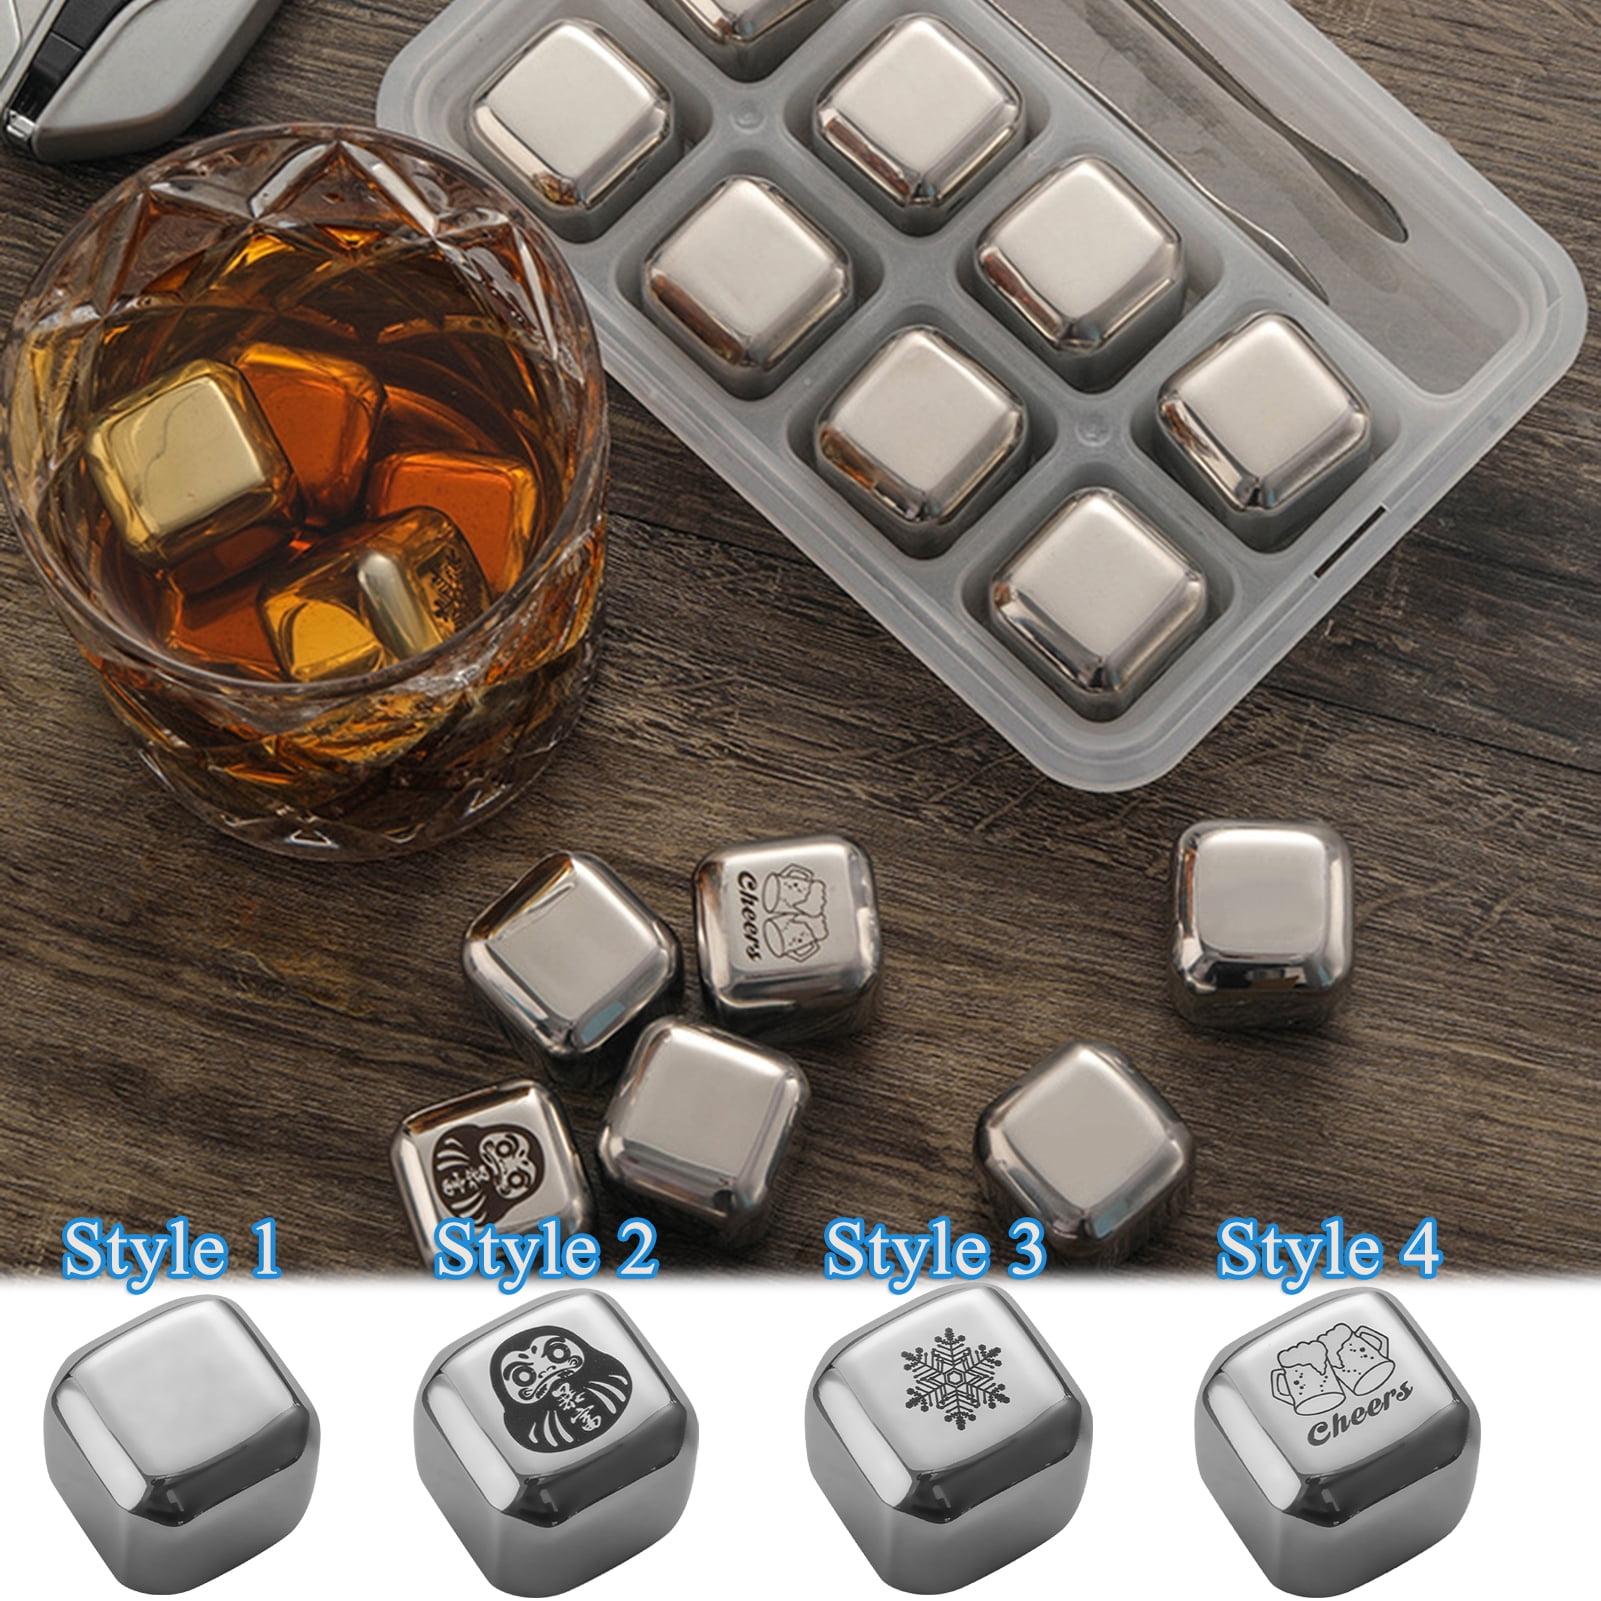 Whiskey Stone Gift Set - Stainless Steel Whiskey Stones with Revolver  Freezer Base, Reusable Ice Cube for Whiskey Gift Set for Men, Dad, Husband